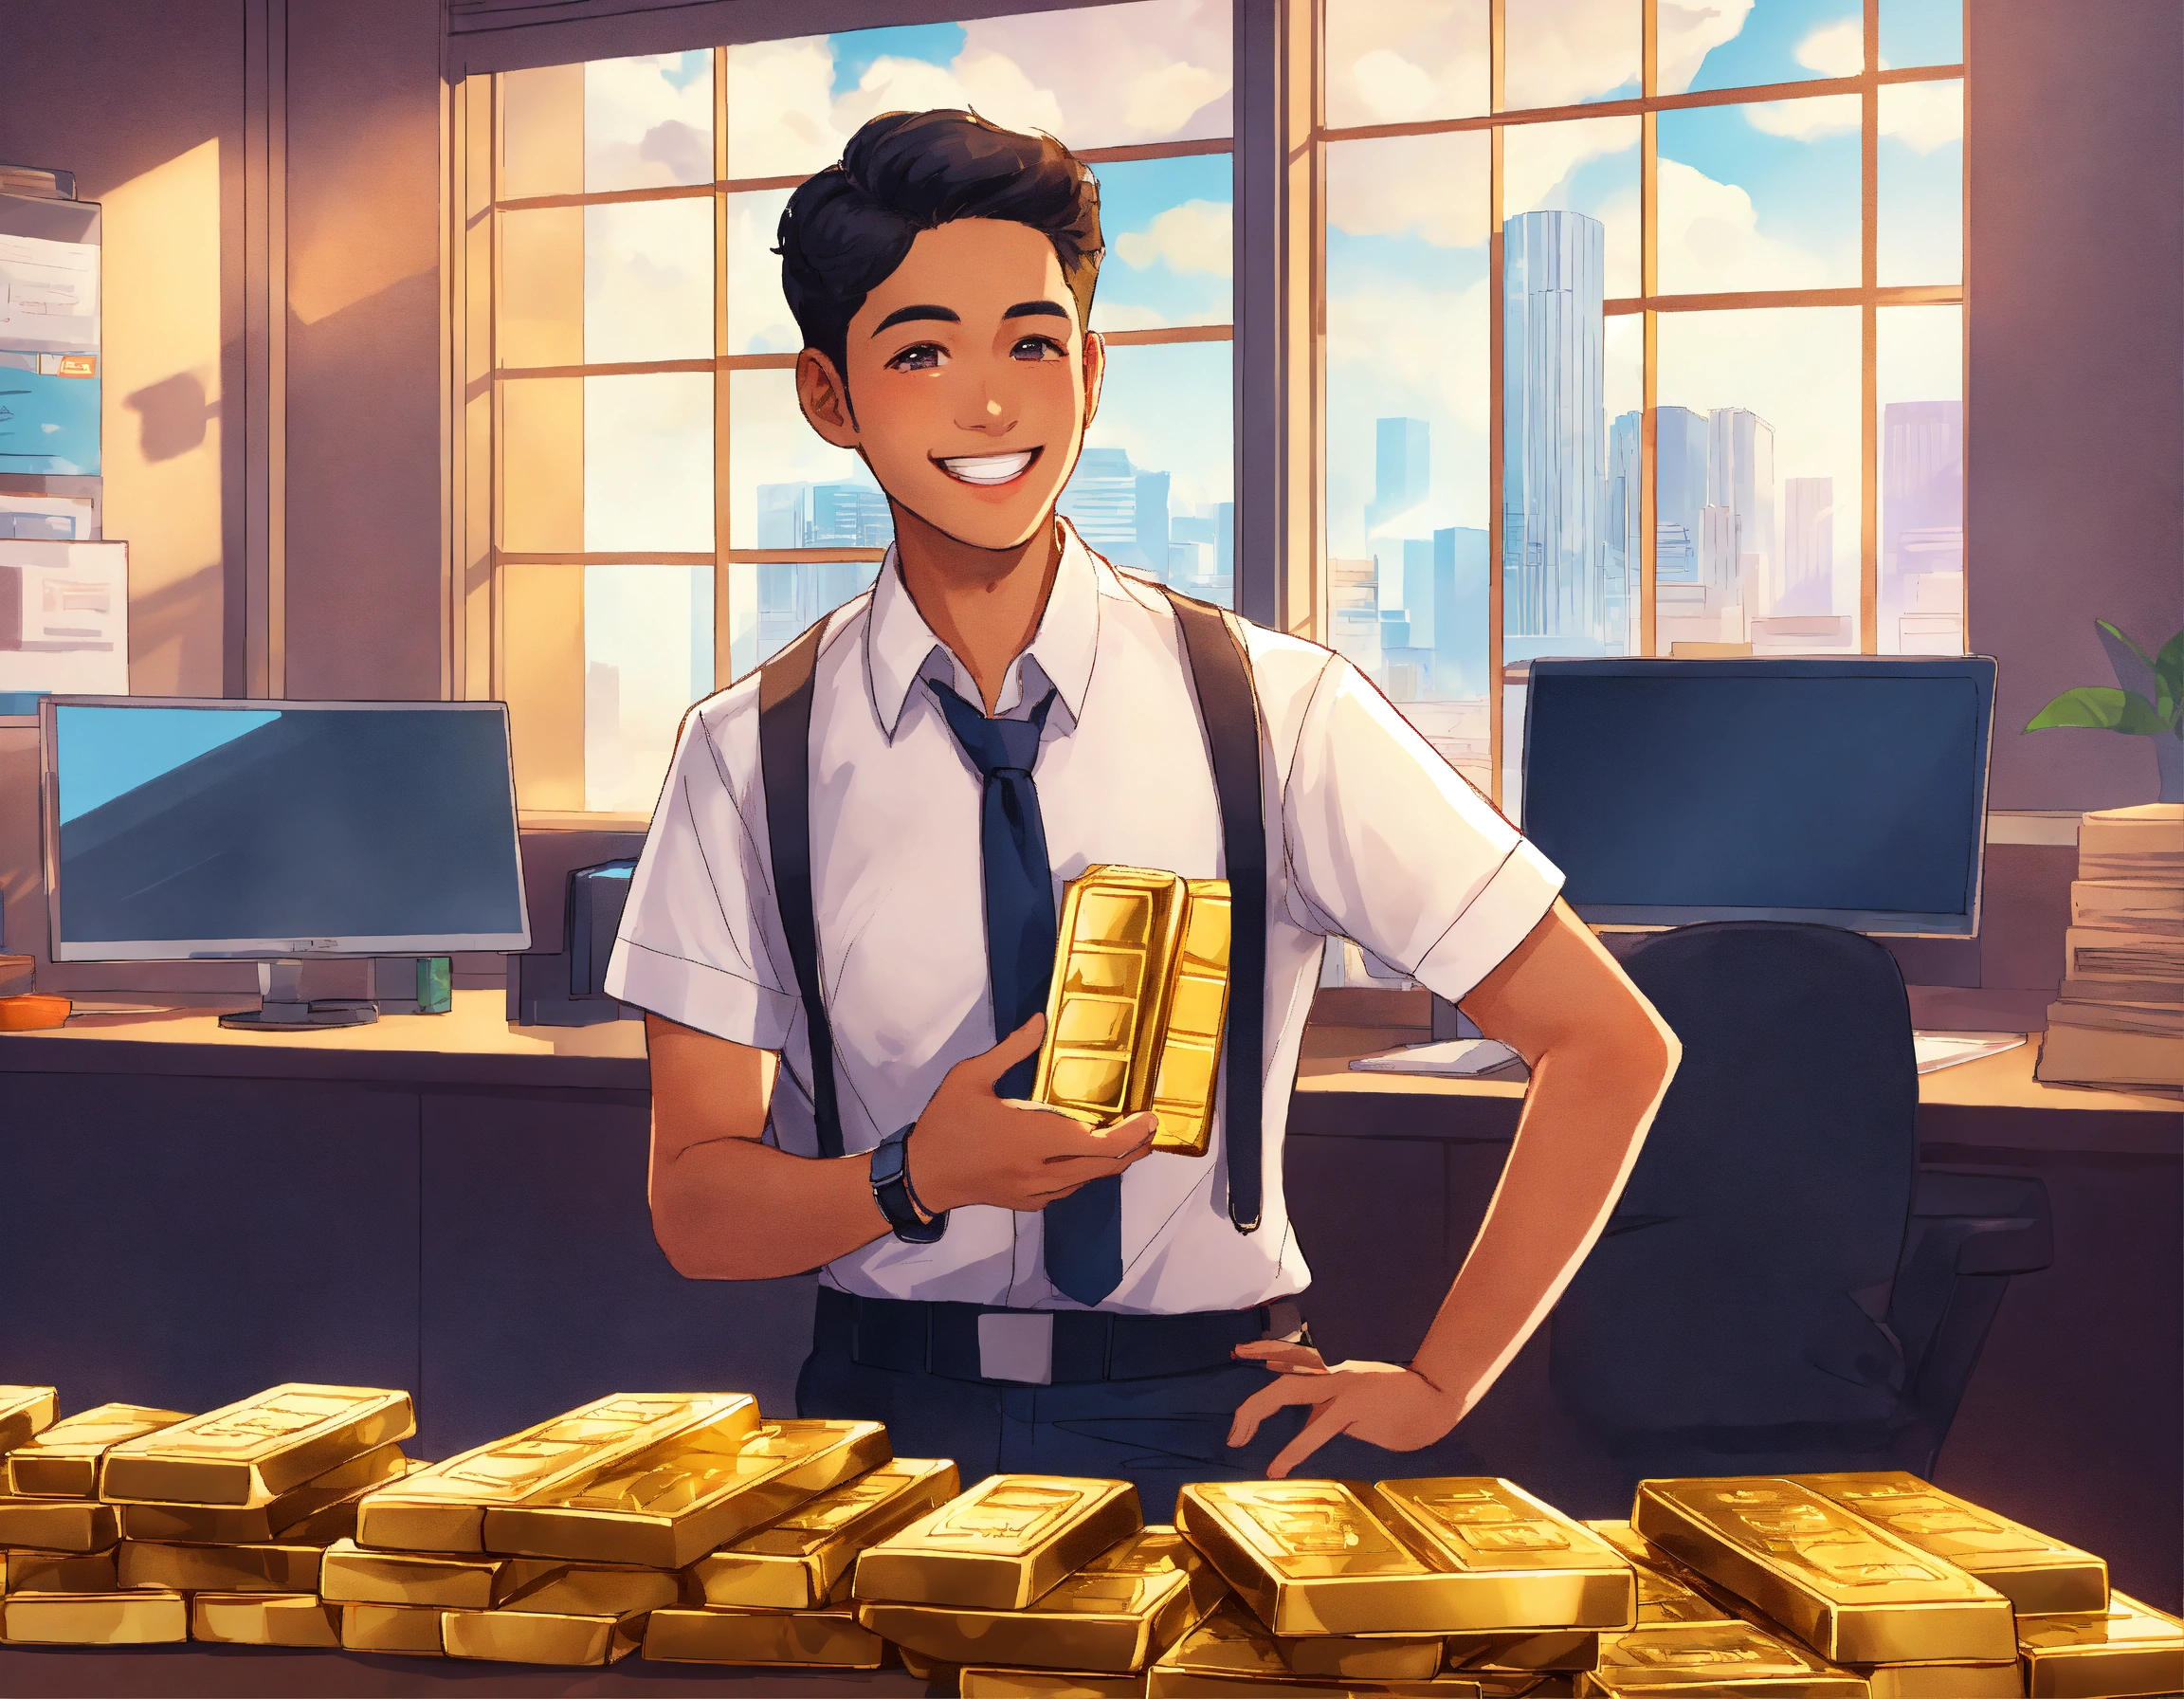 Lexica - A young person wearing an office uniform, holding gold bars ...